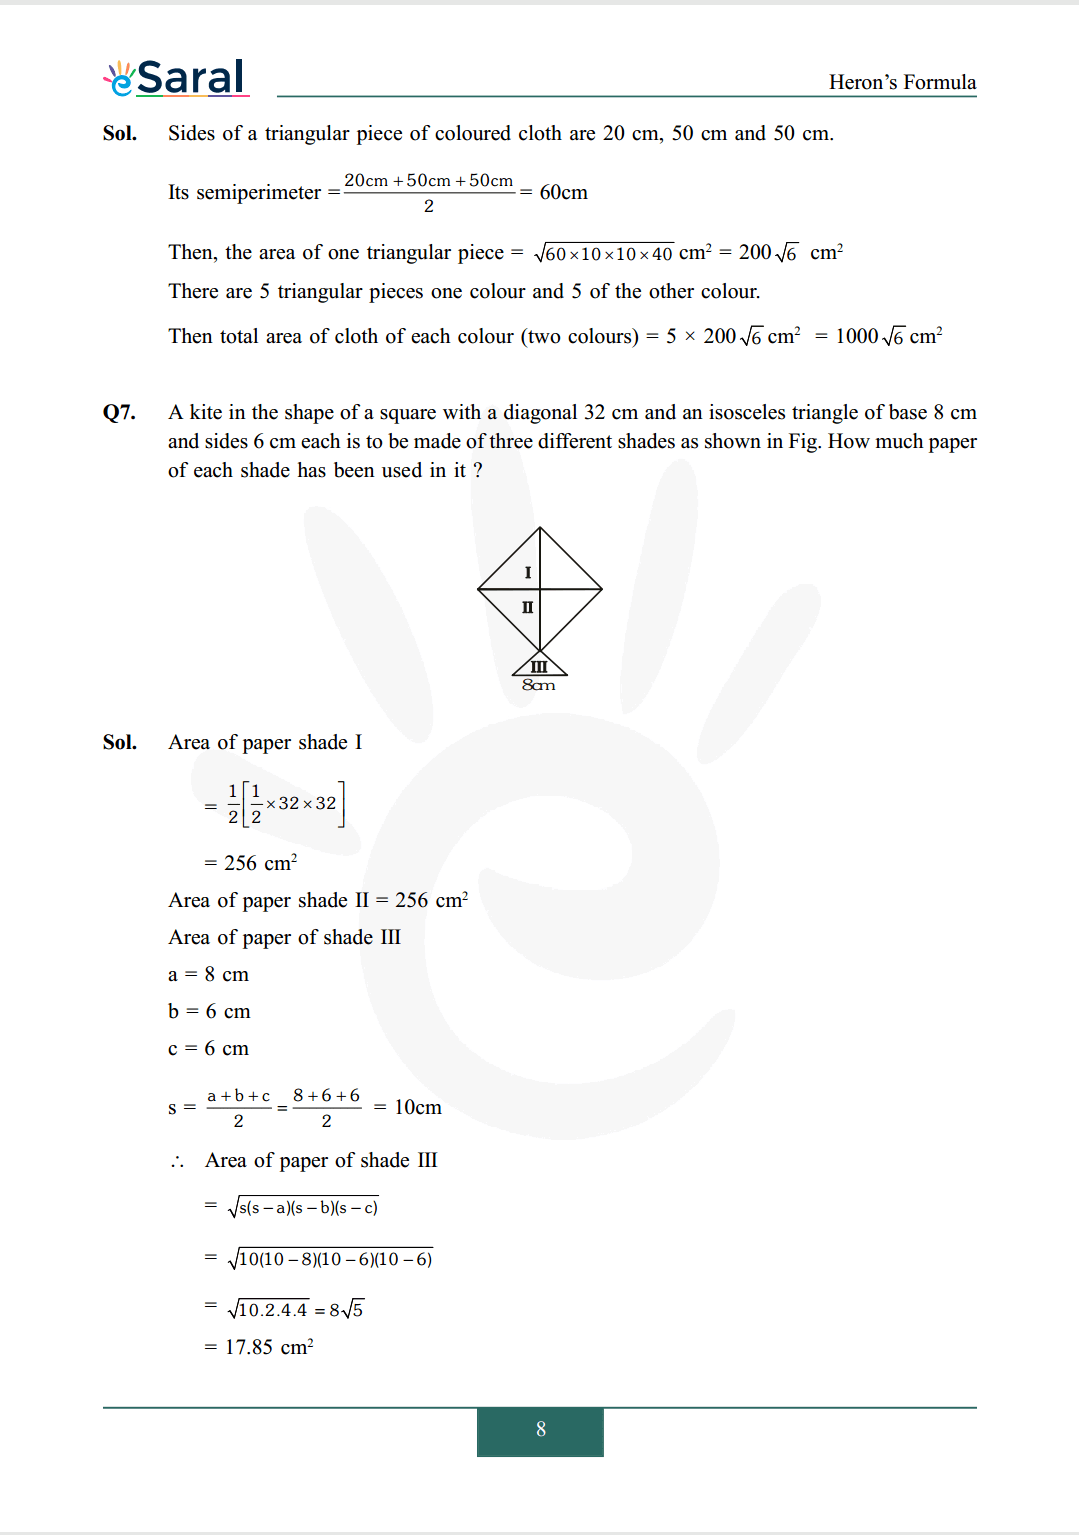 Class 9 maths chapter 12 exercise 12.2 solutions Image 5